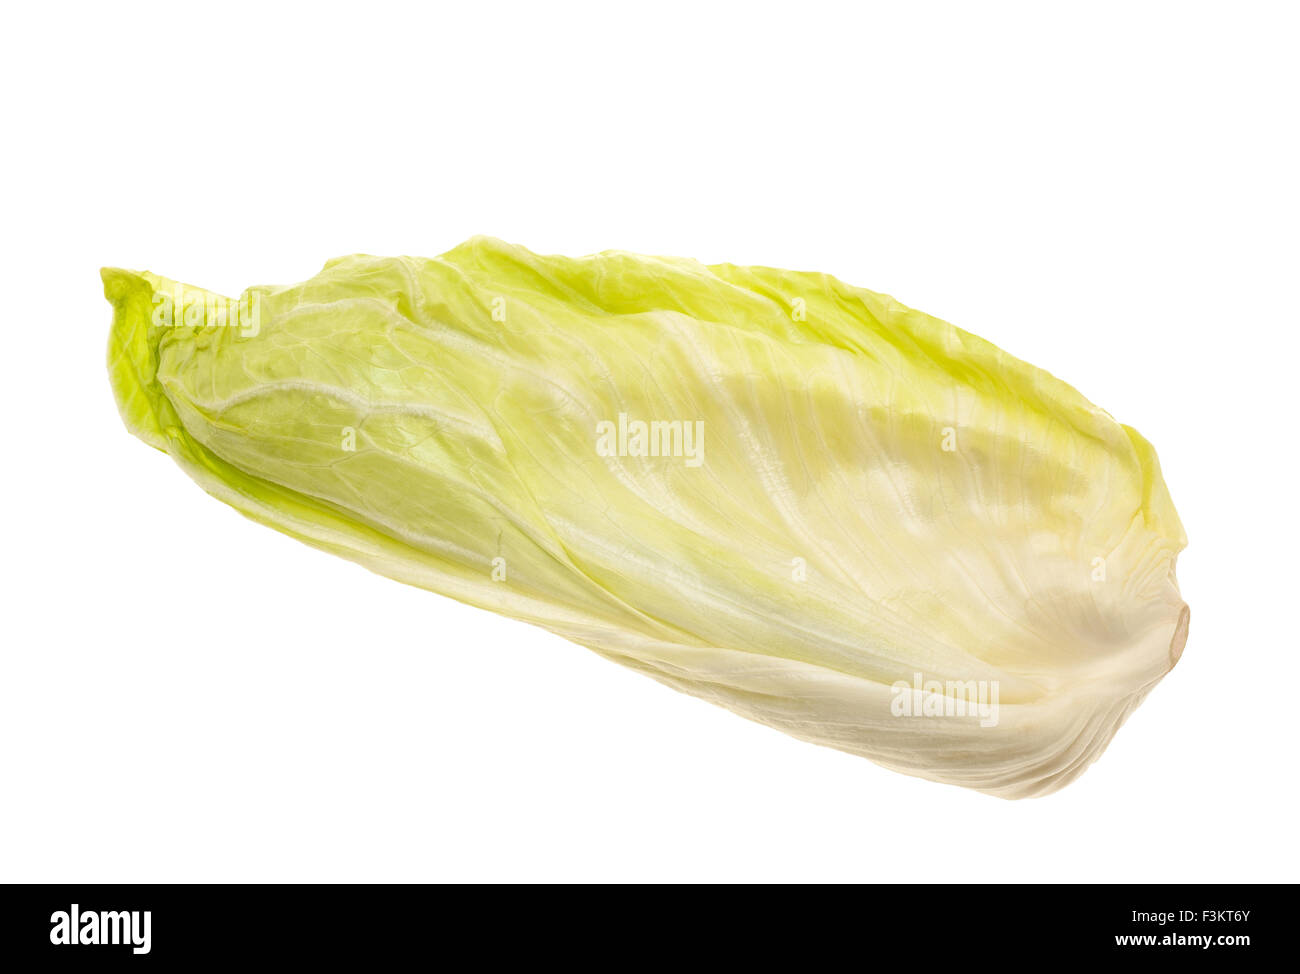 Salade verte isolated on white Banque D'Images